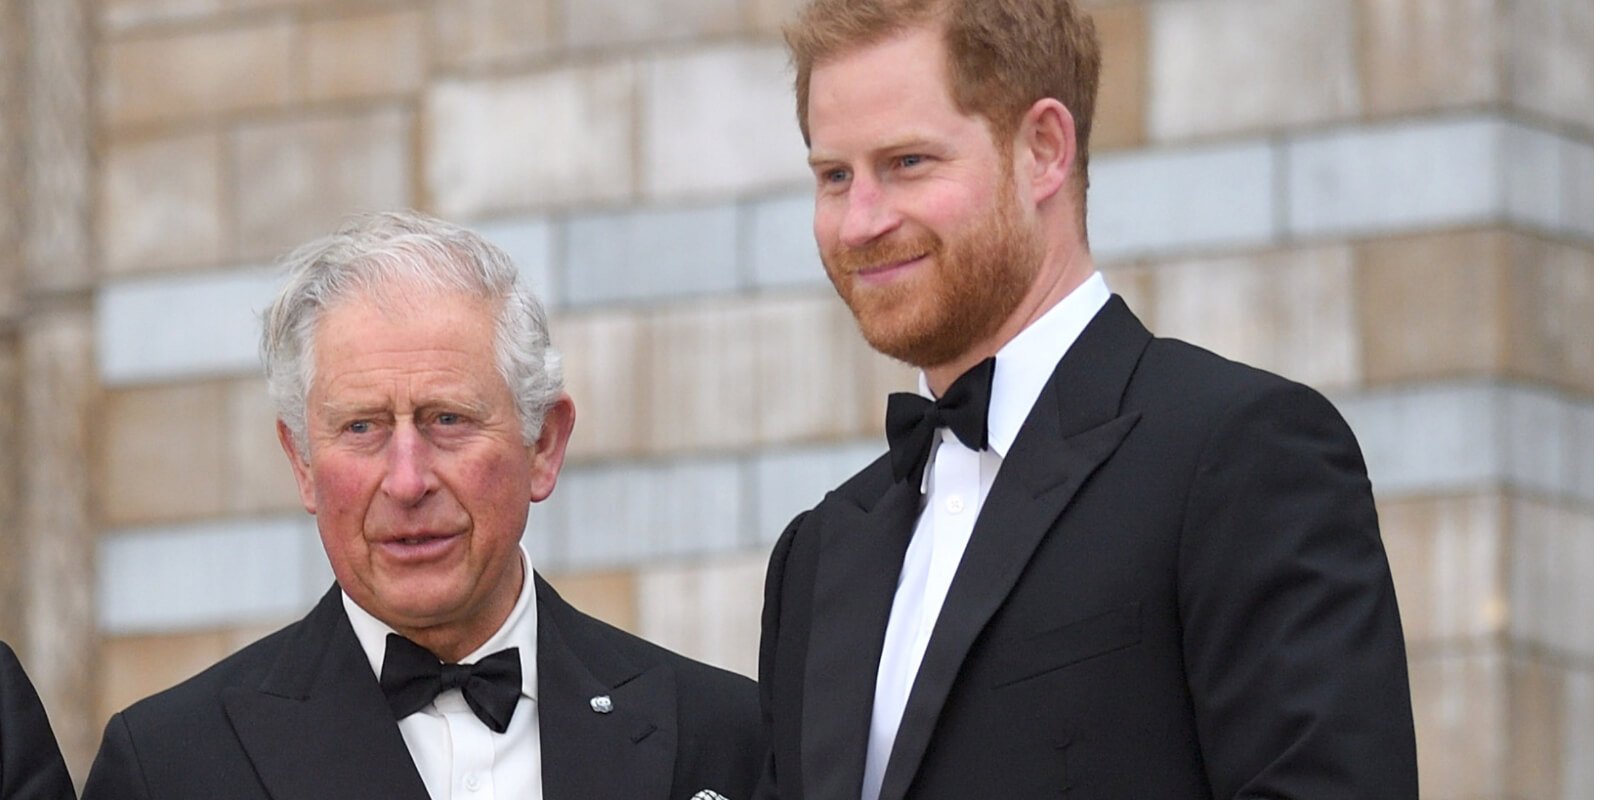 King Charles III and Prince Harry in a photograph taken in 2018.